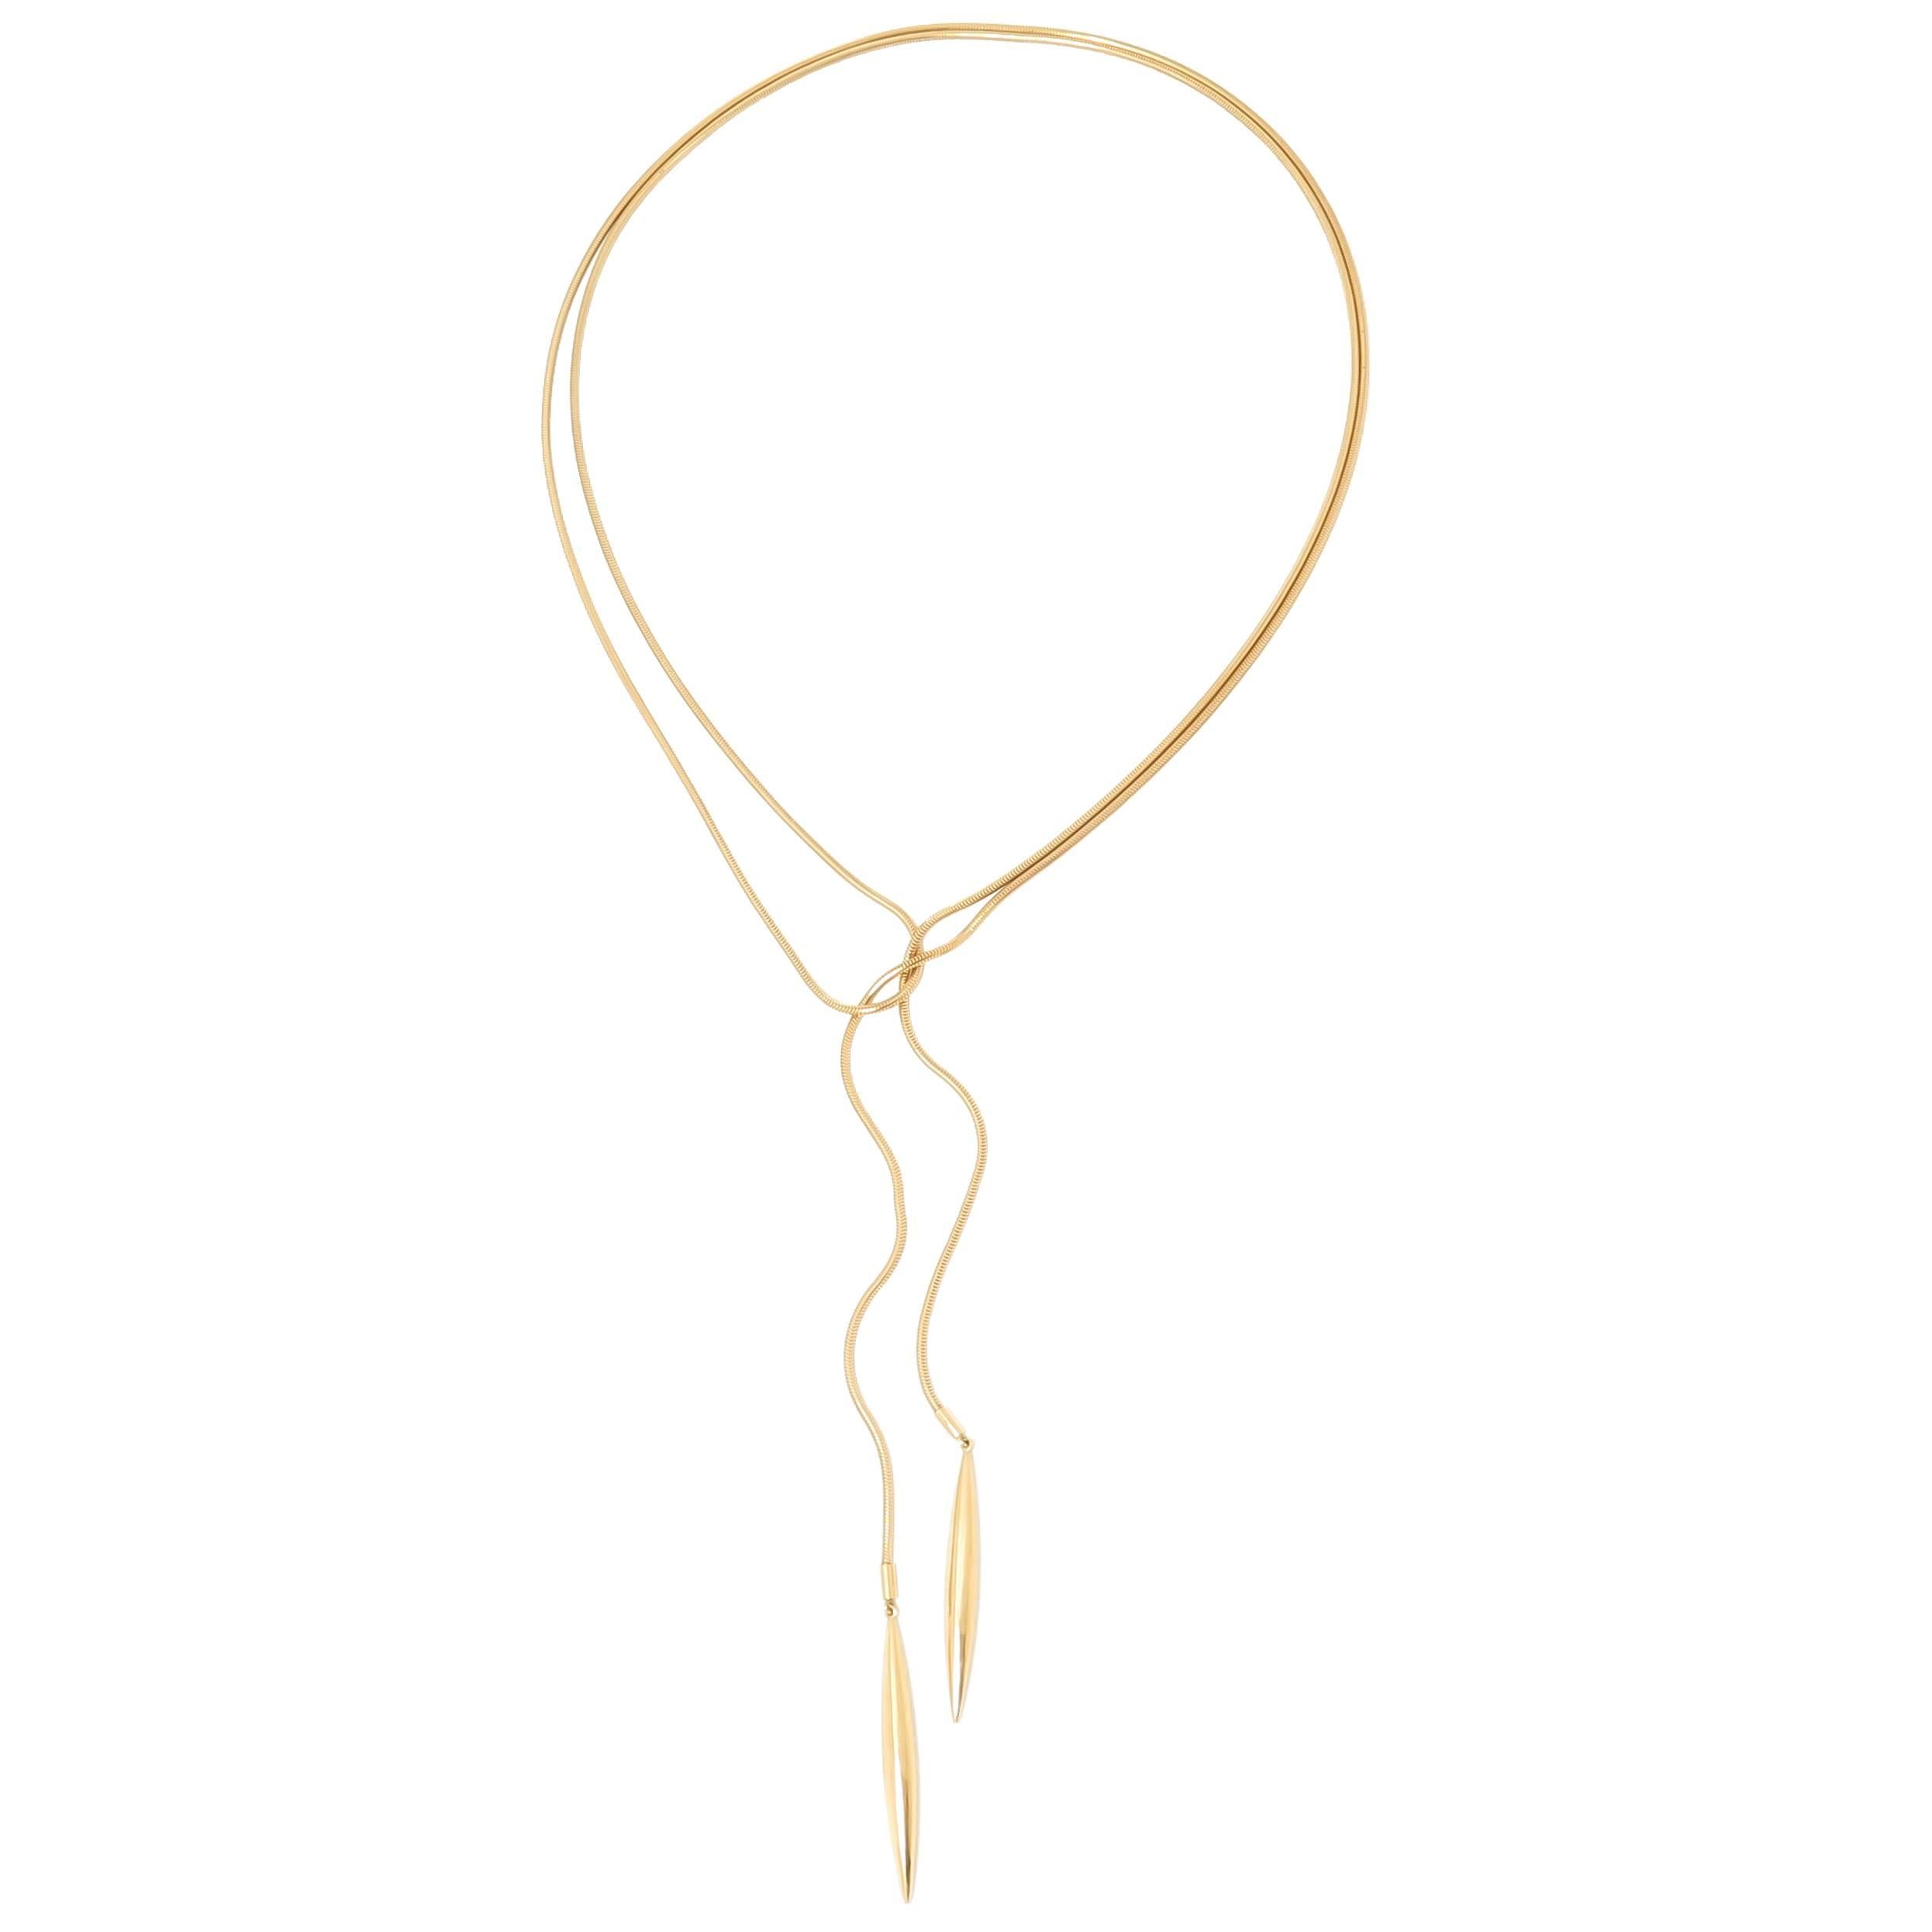 Tiffany & Co. Gold Lariat Necklace